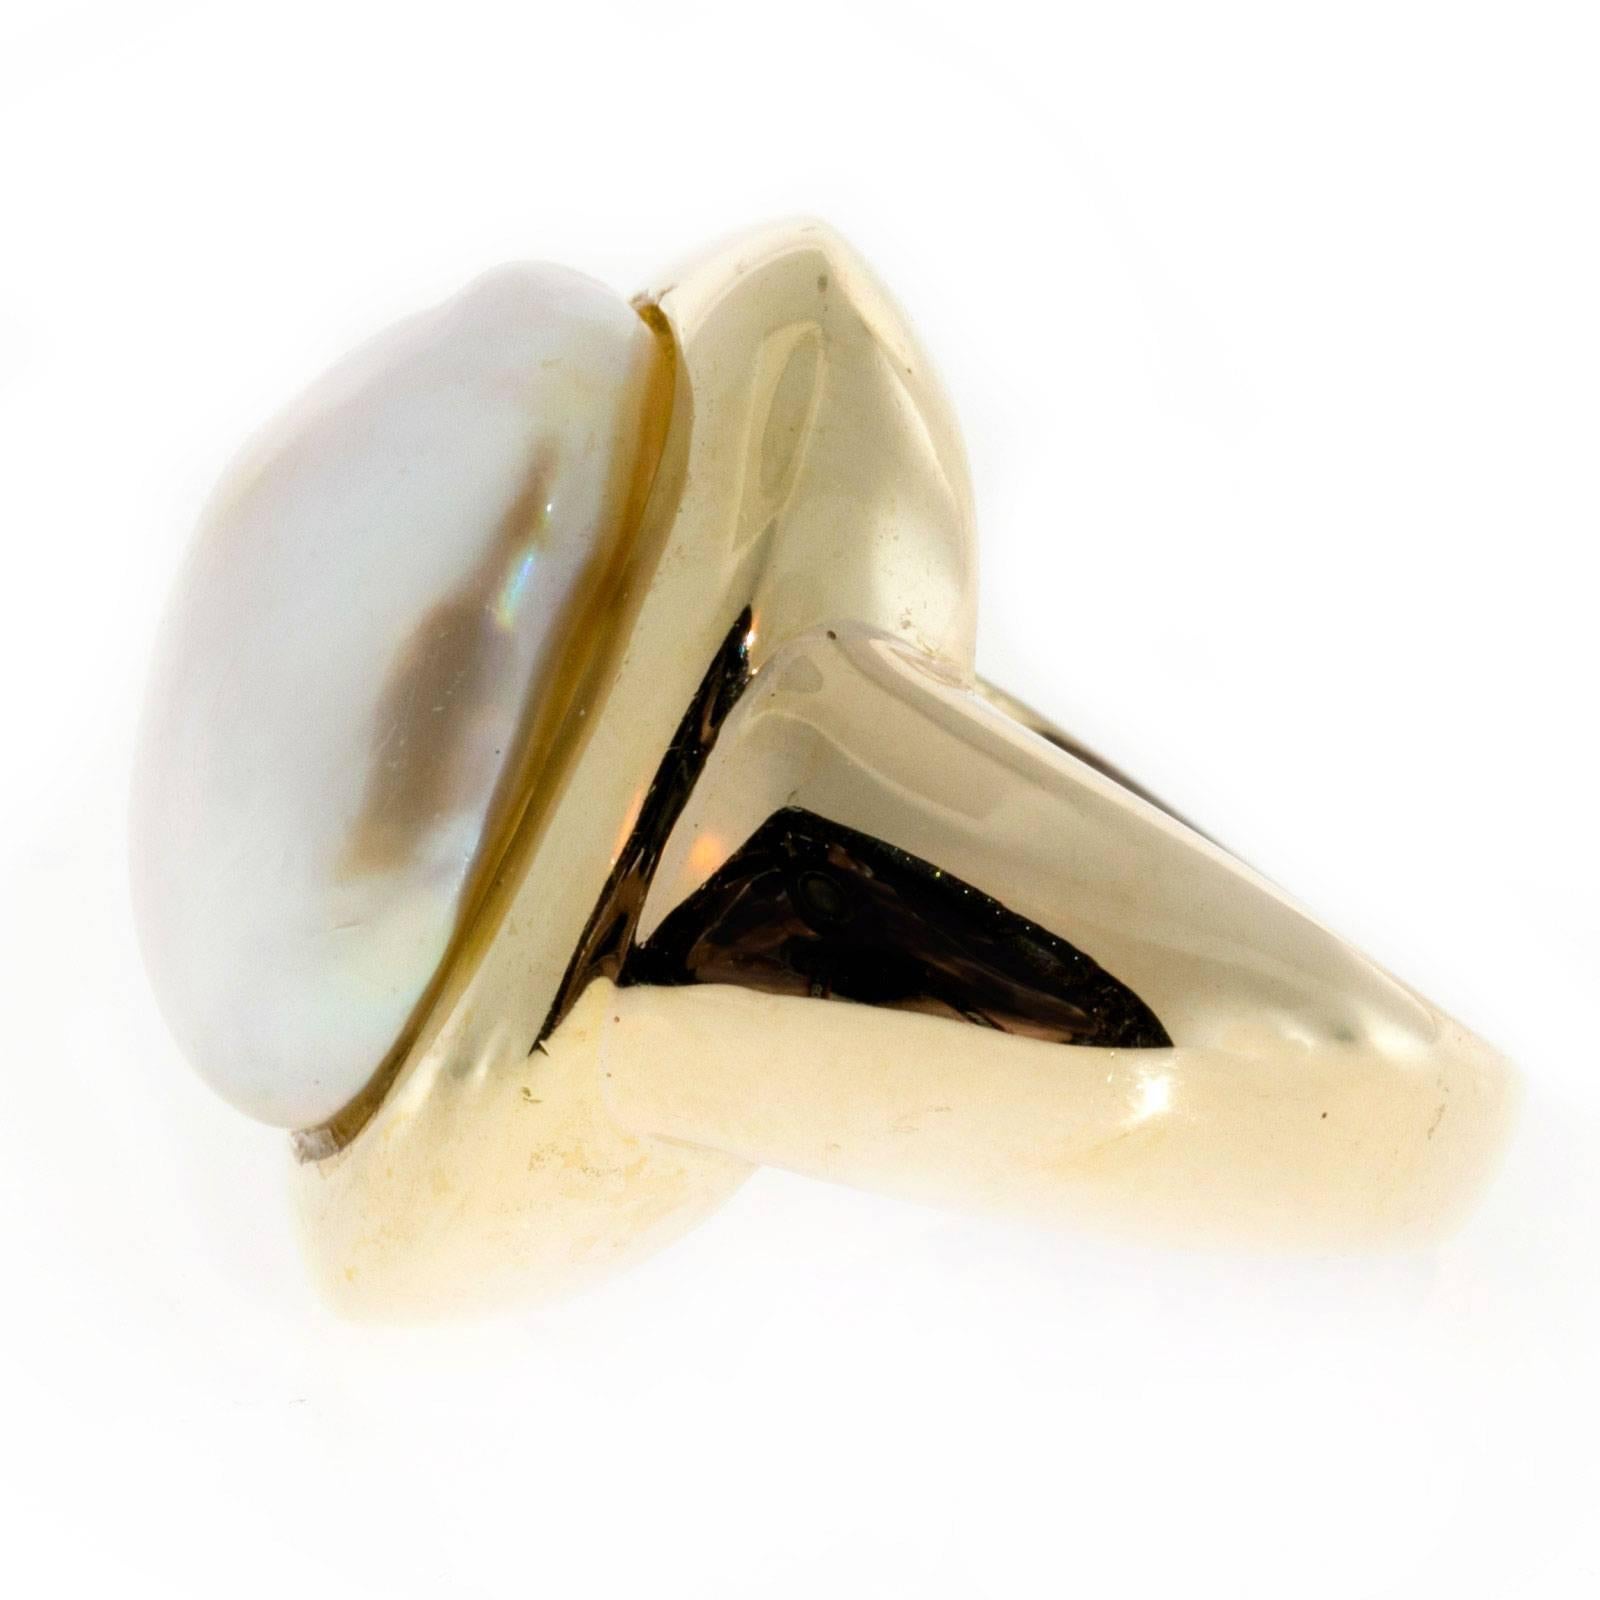 Vintage wonderful extra-large south sea cultured pearl ring in a simple solid yellow gold substantial ring artistically filled securely around the pearl. Circa 1950-1960.

1 South Sea 21 x 16.9 x 12.9mm cultured white pearl yellow gold ring.